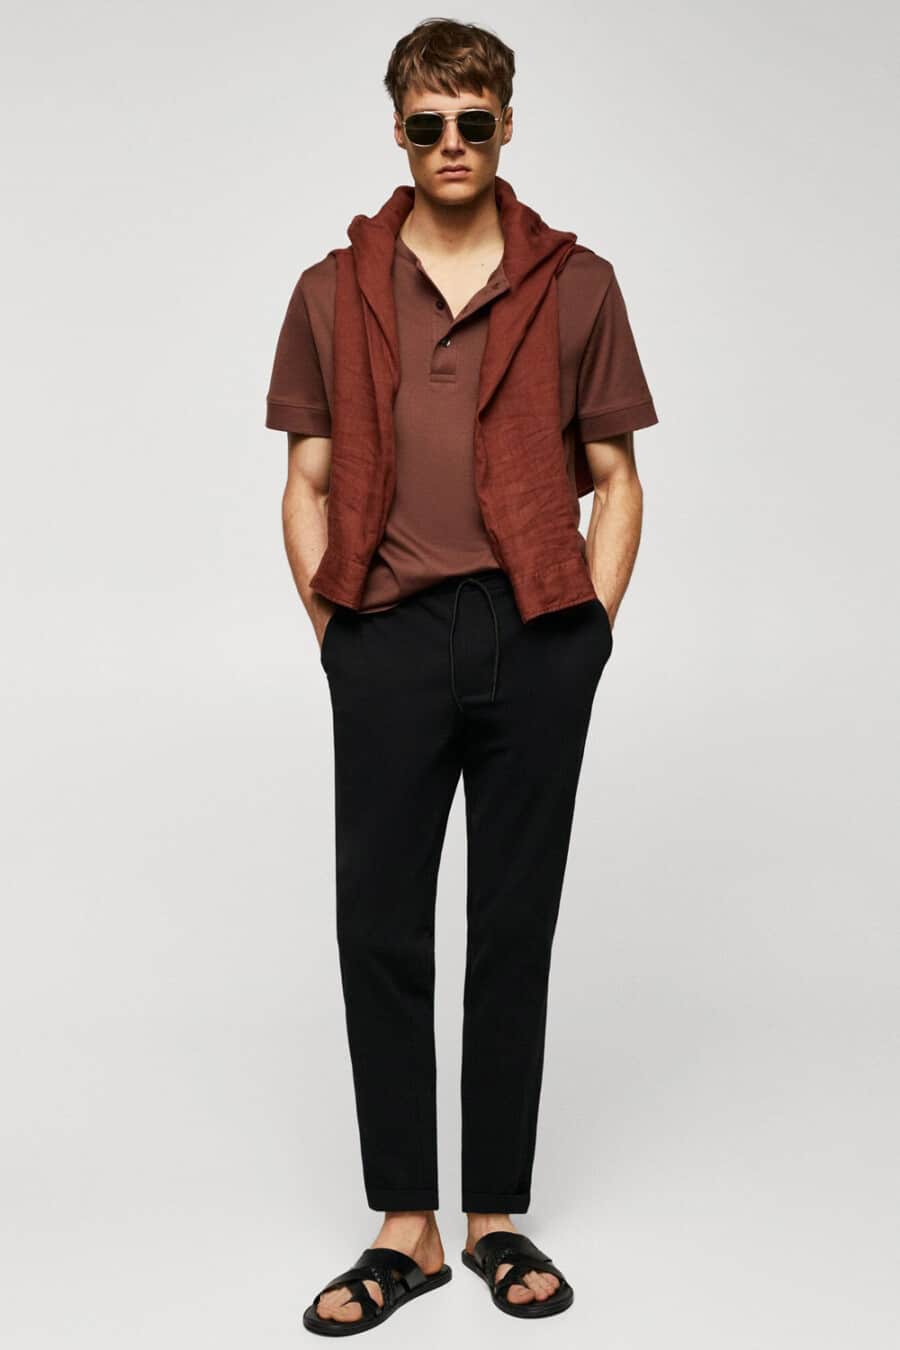 Men's black cropped pants, brown polo shirt and black sandals outfit